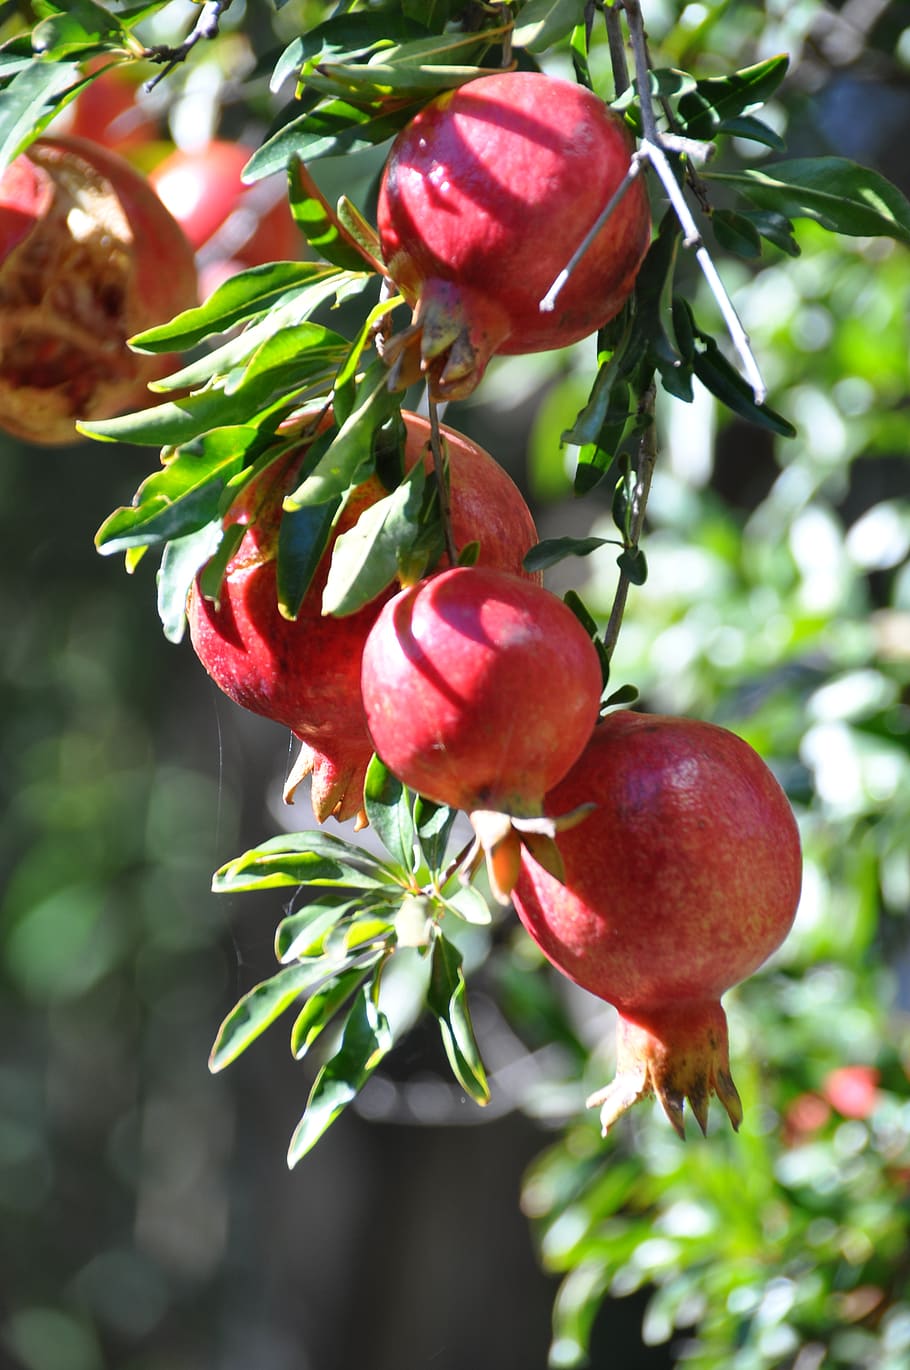 pomegranate, fruit, fruits, tree, food and drink, food, healthy eating, growth, freshness, red